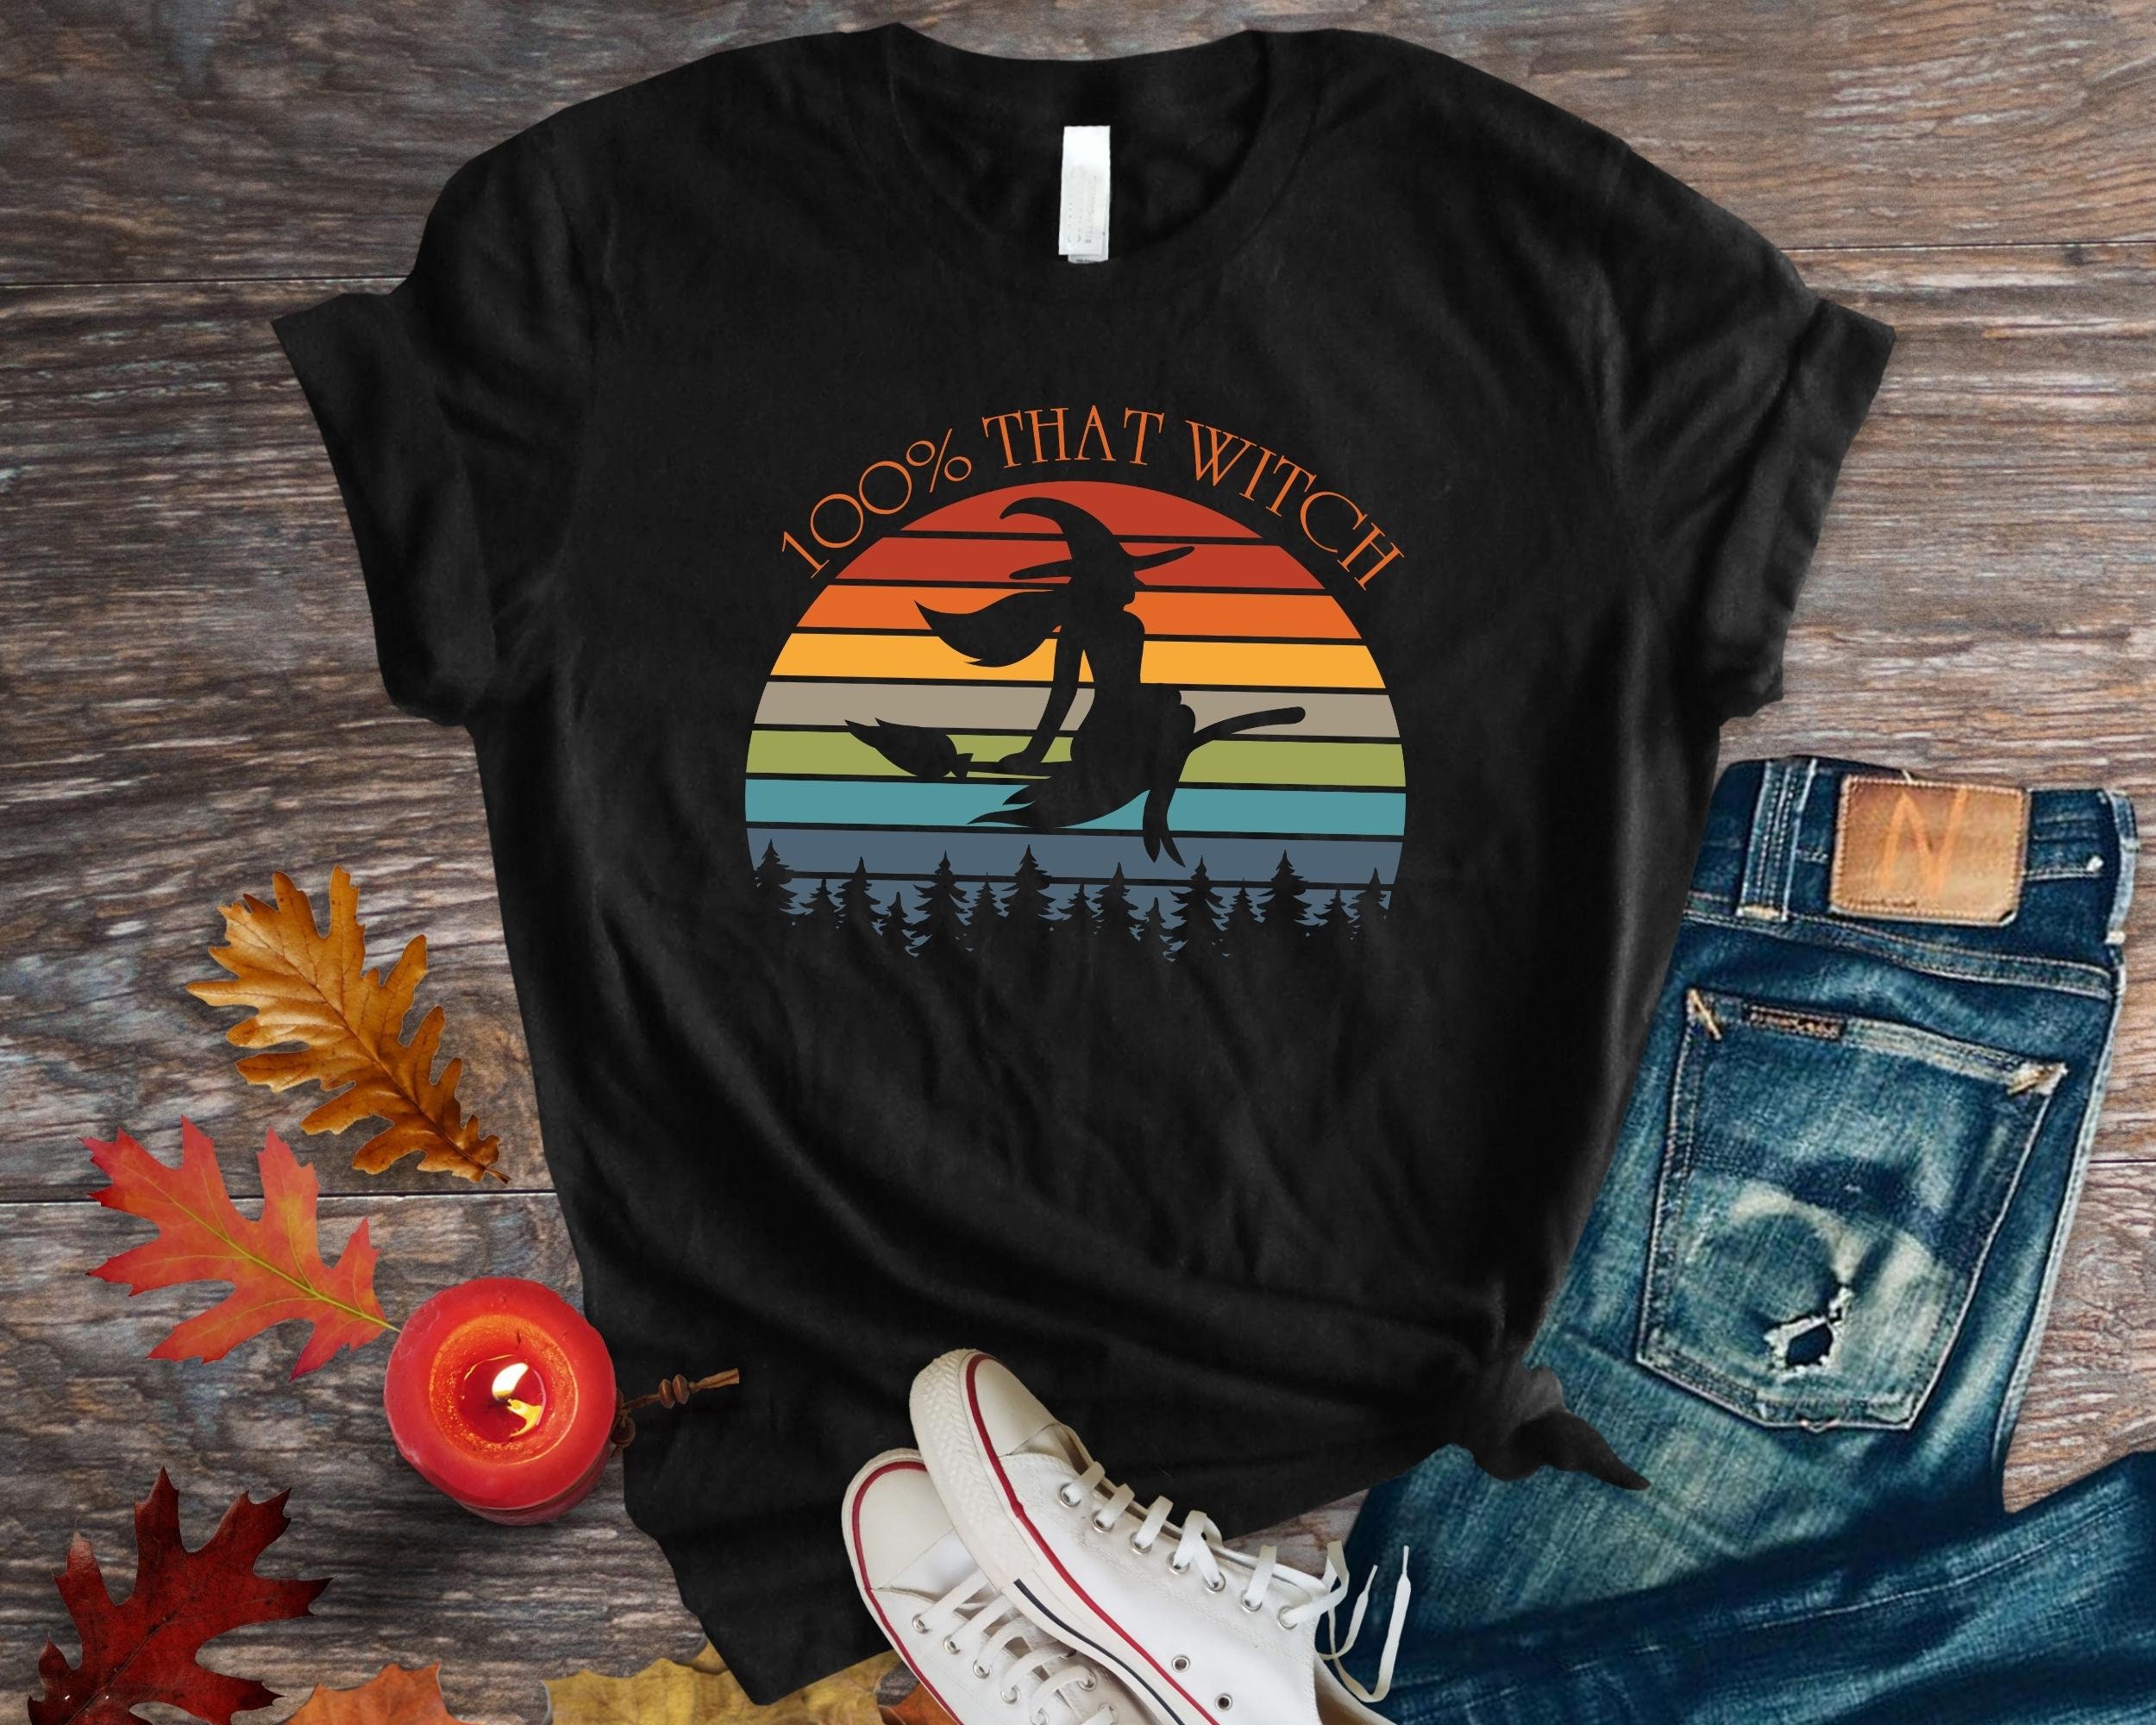 Discover 100 Percent That Witch Halloween T-Shirt